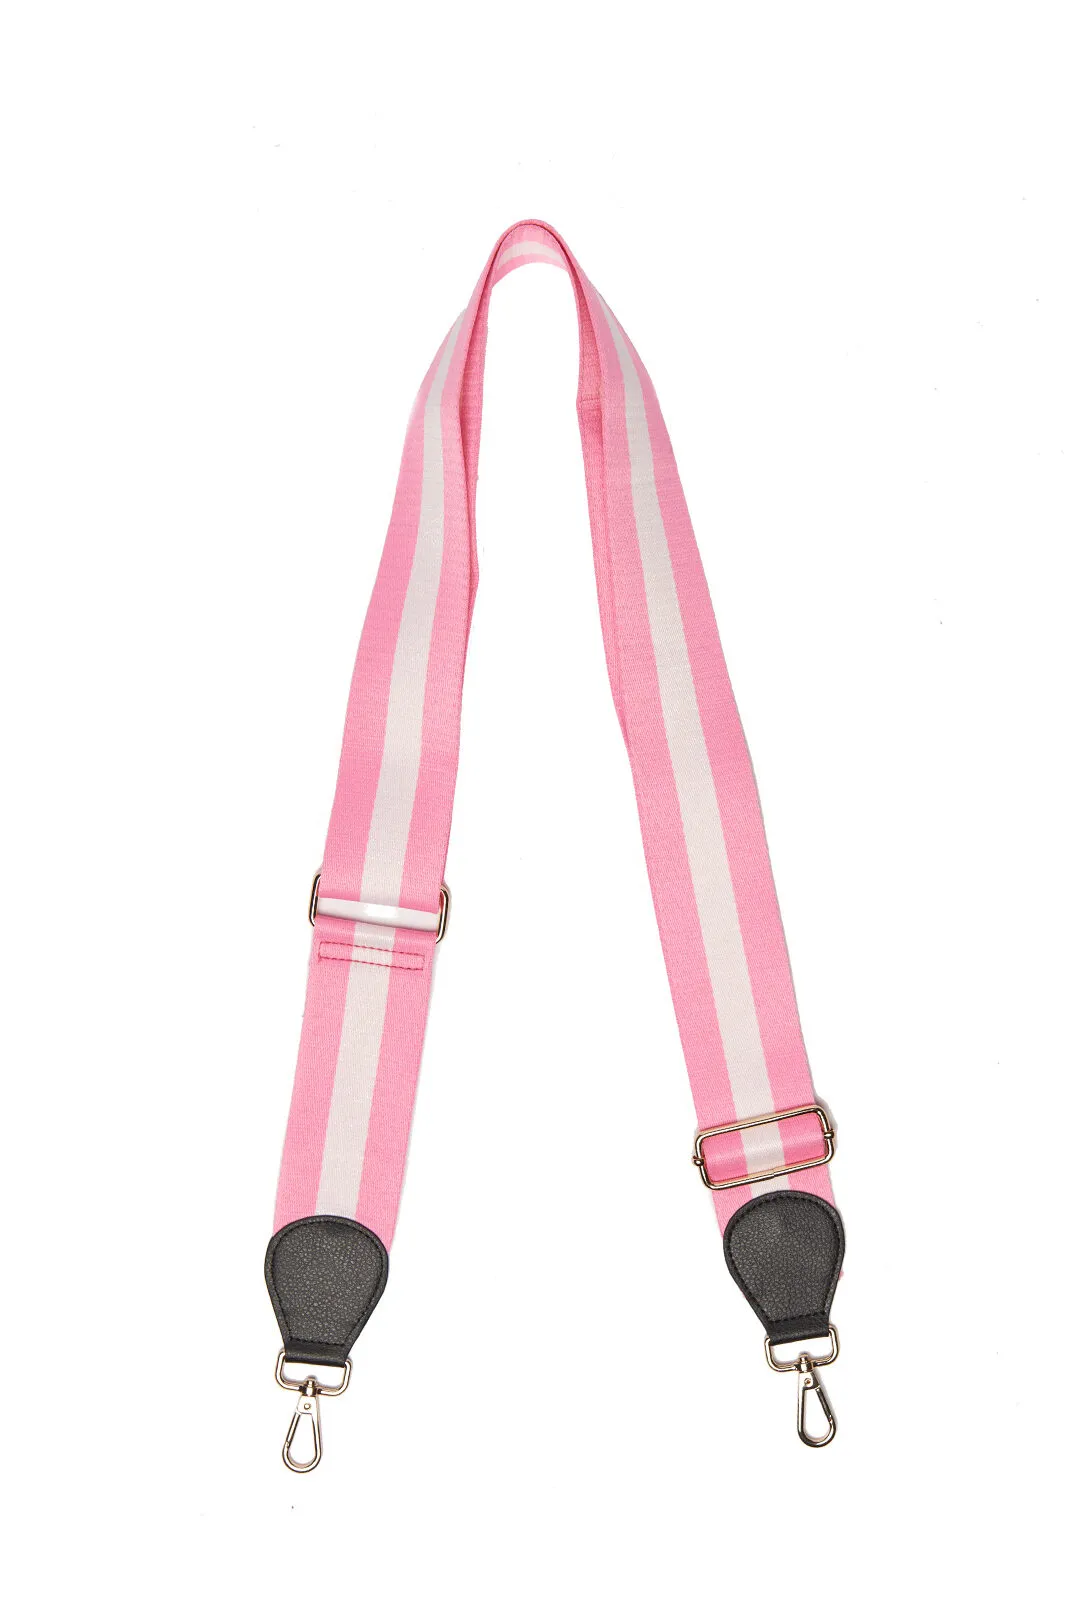 Rugged Hide bag Strap - Pink and White General Rugged Hide   